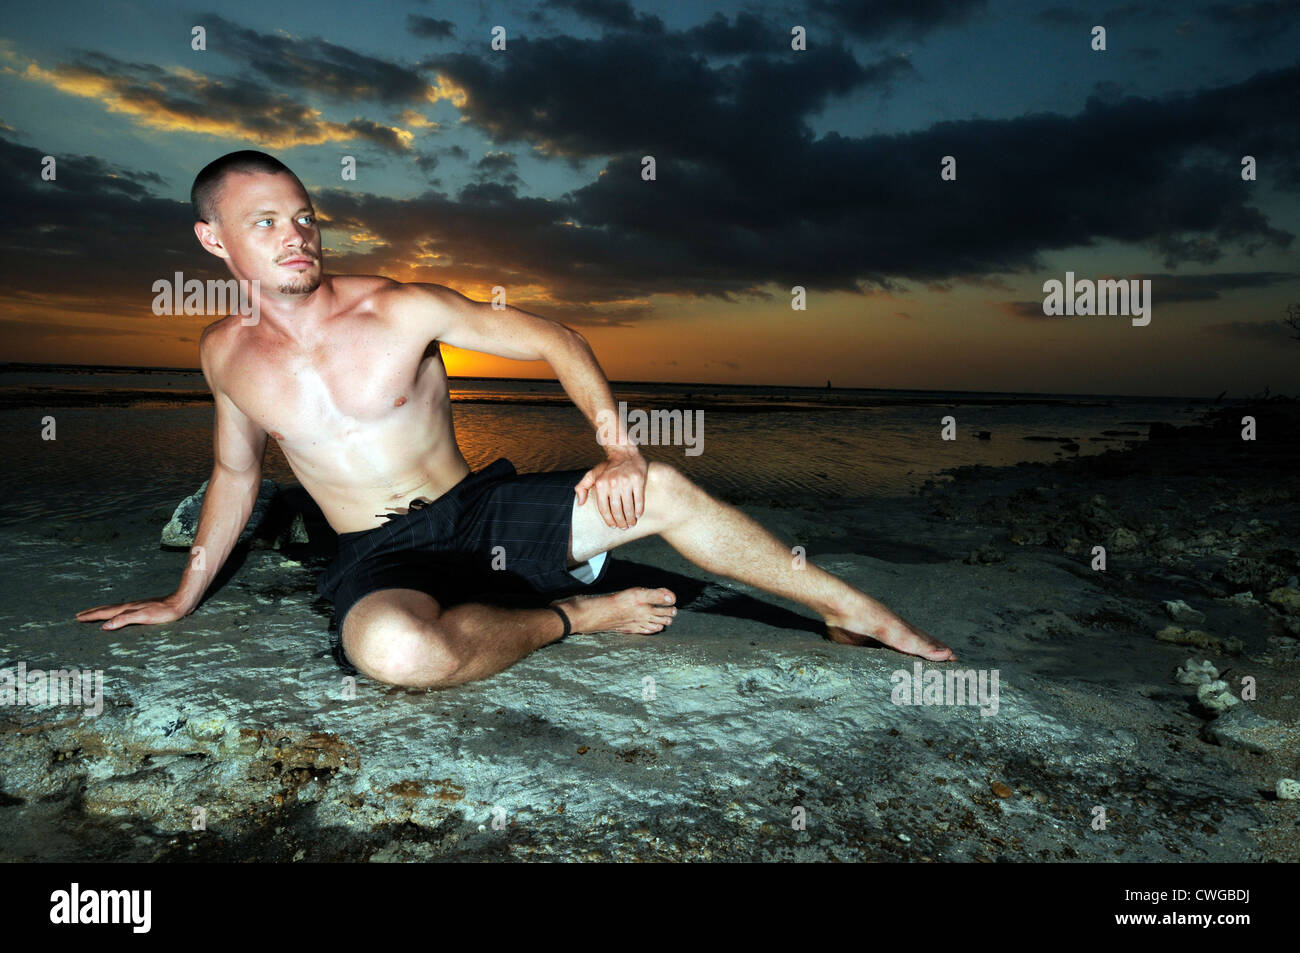 man posing on a beach with sunset Stock Photo